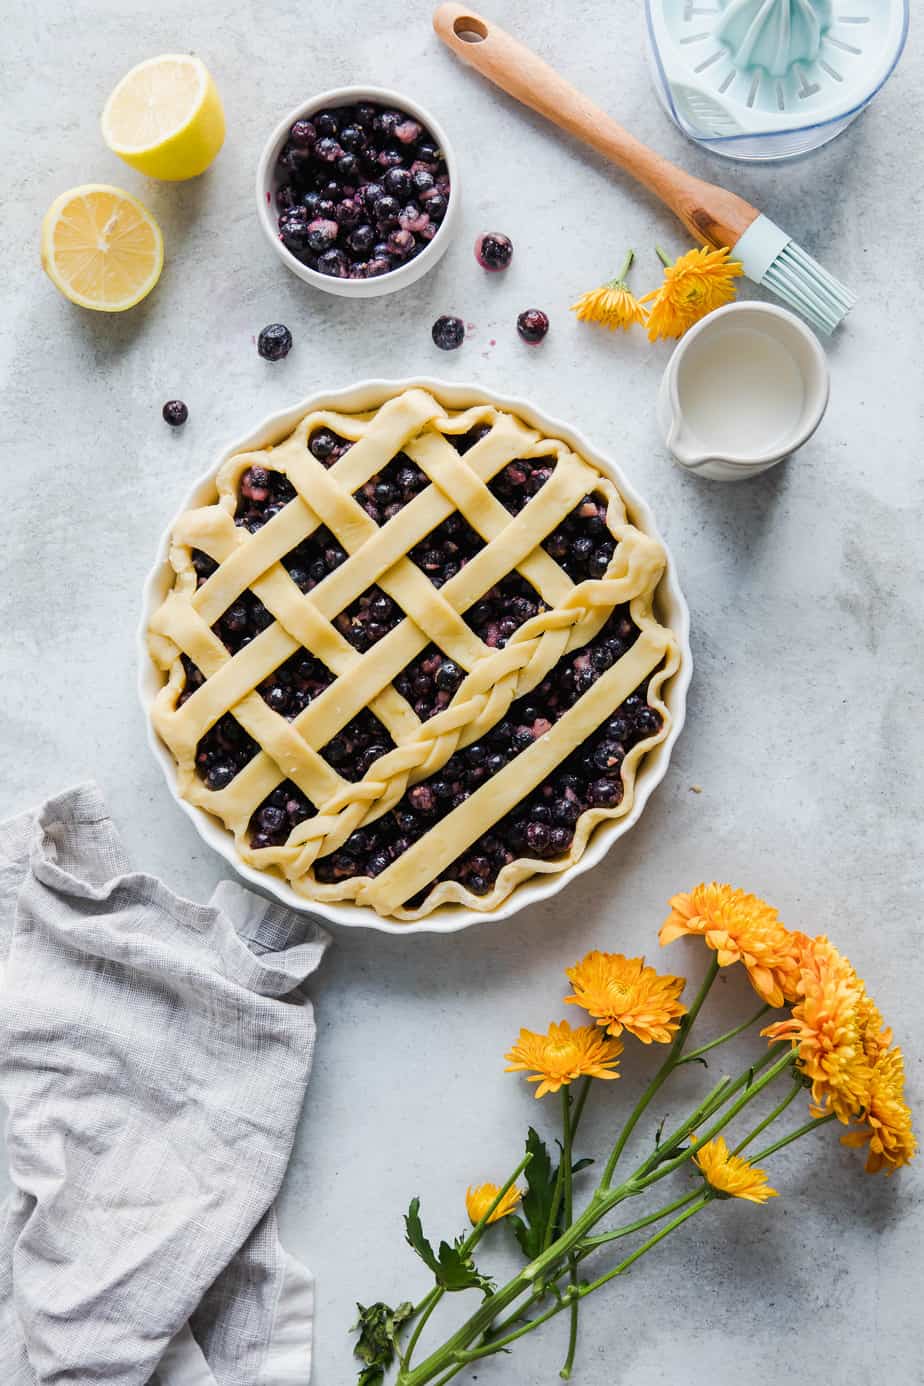 An unbaked blueberry and strawberry pie with fresh flowers and berries.